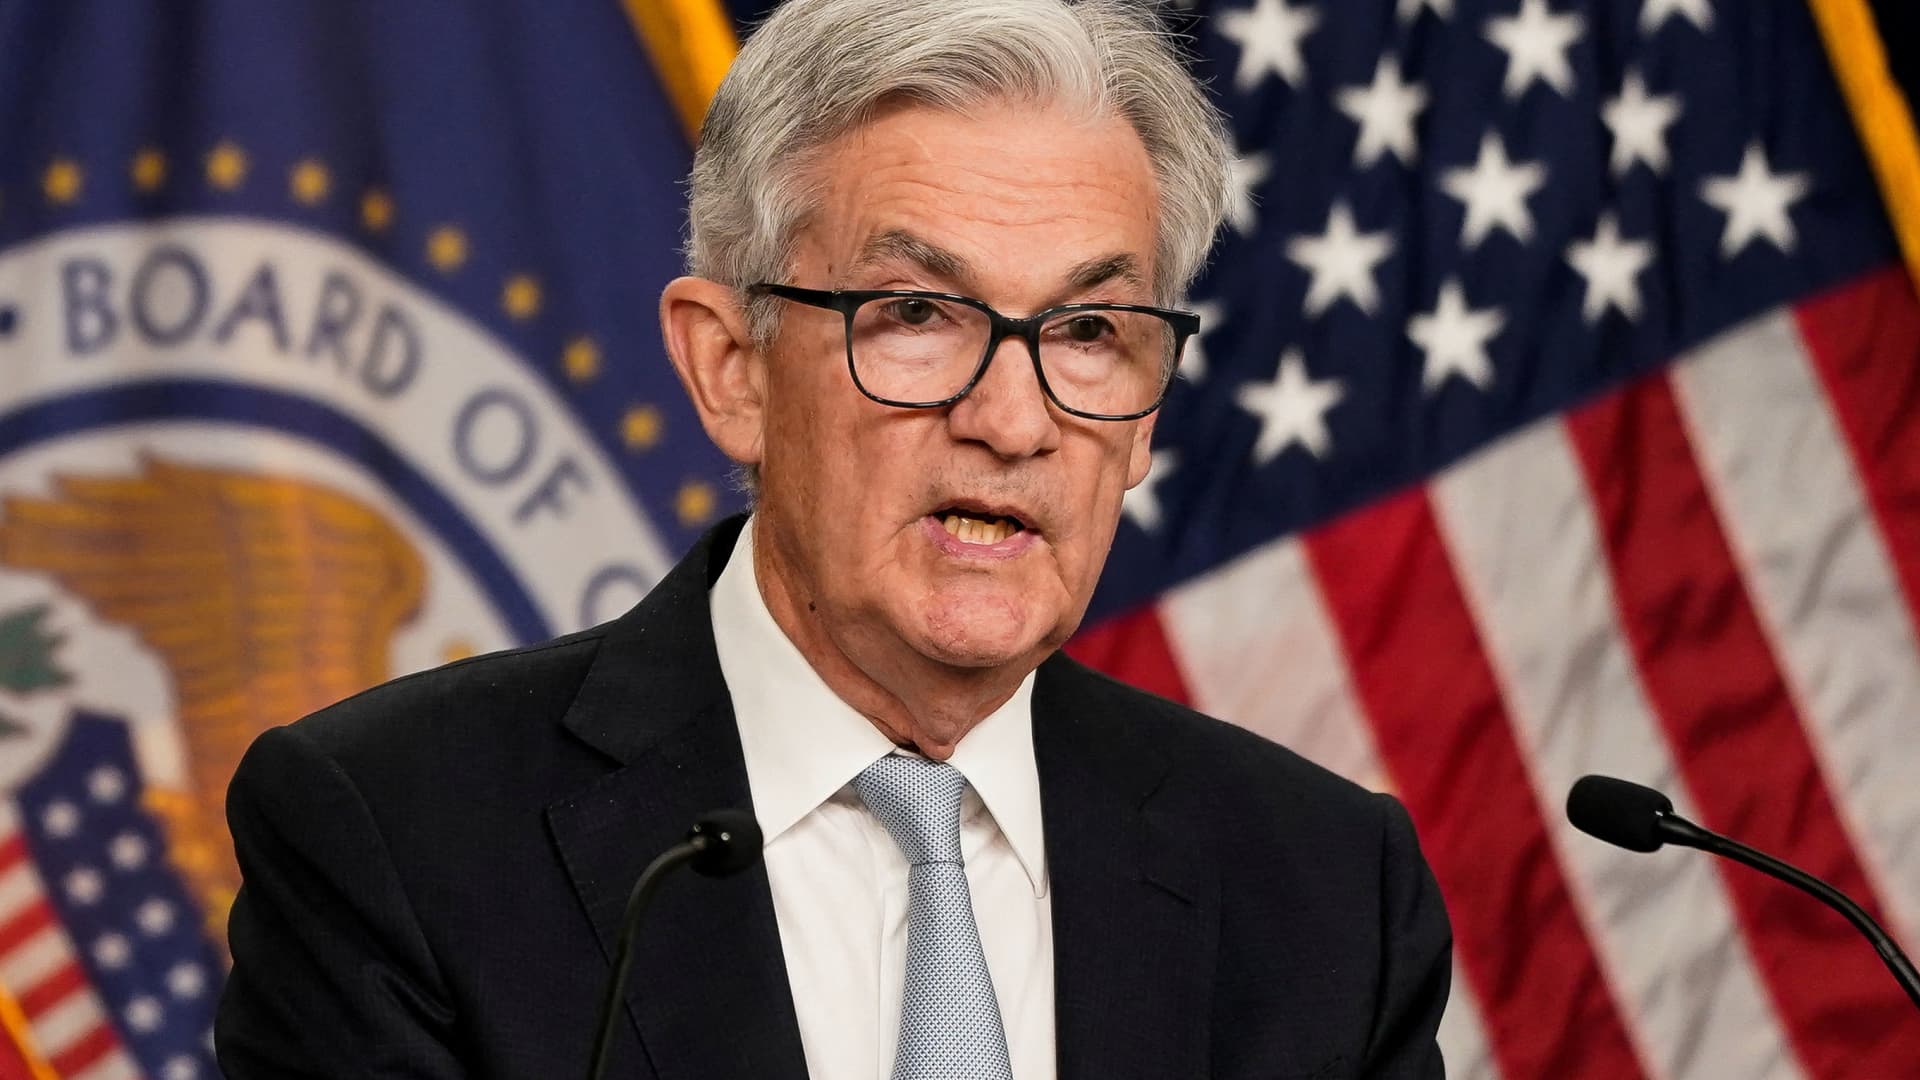 Fed Chair Powell says smaller interest rate hikes could start in December